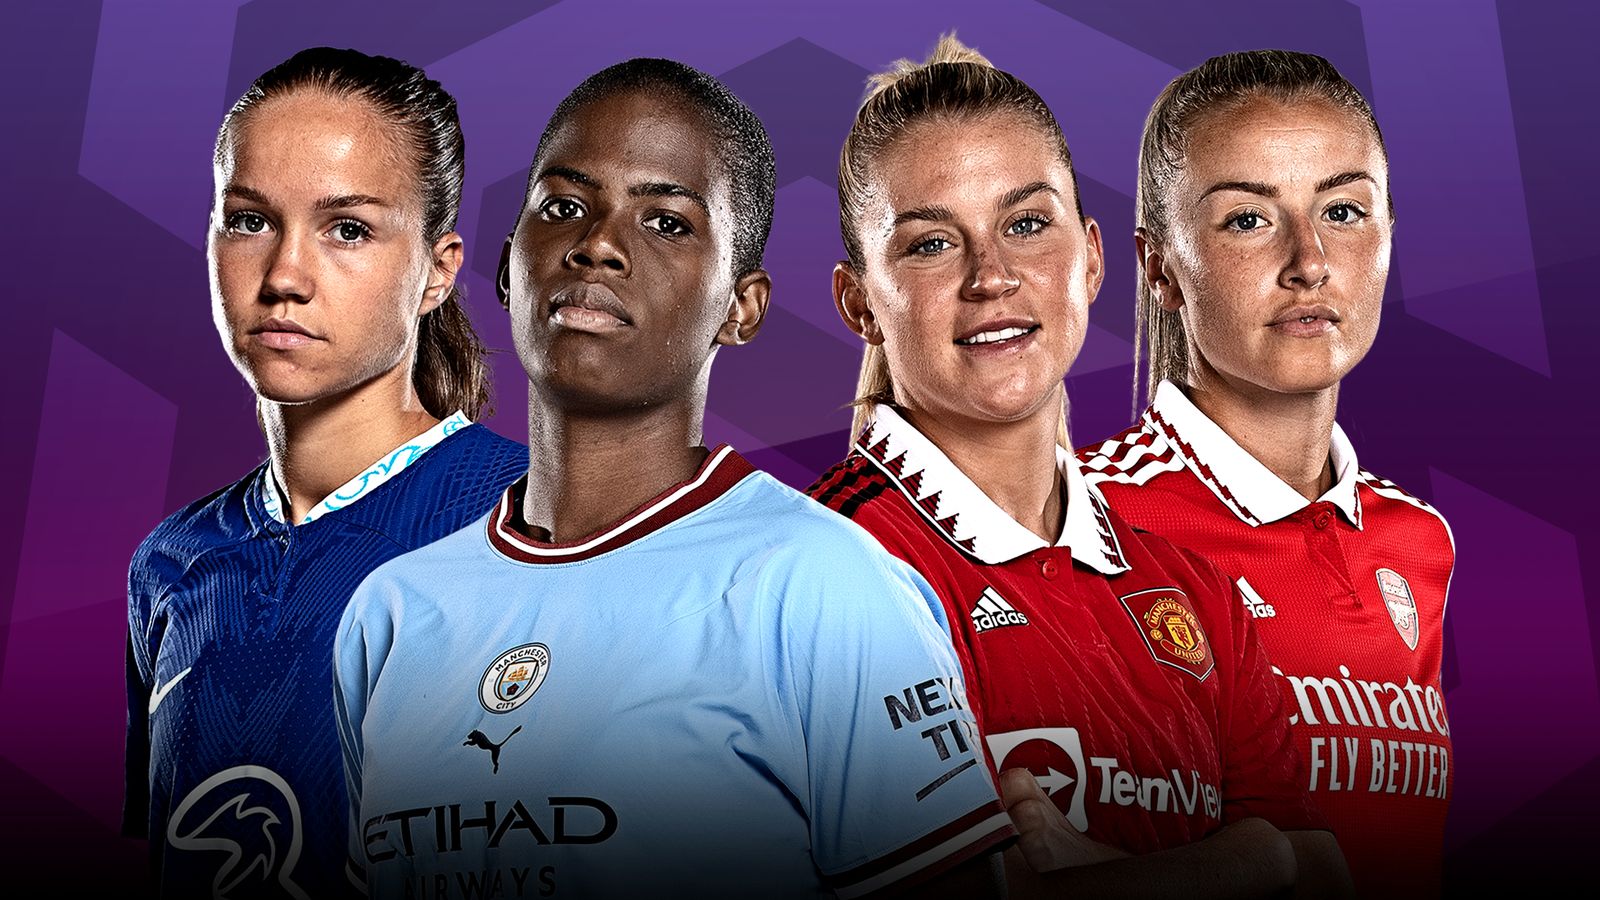 women-s-super-league-title-race-everything-you-need-to-know-about-the-run-in-as-chelsea-man-utd-man-city-and-arsenal-go-for-glory